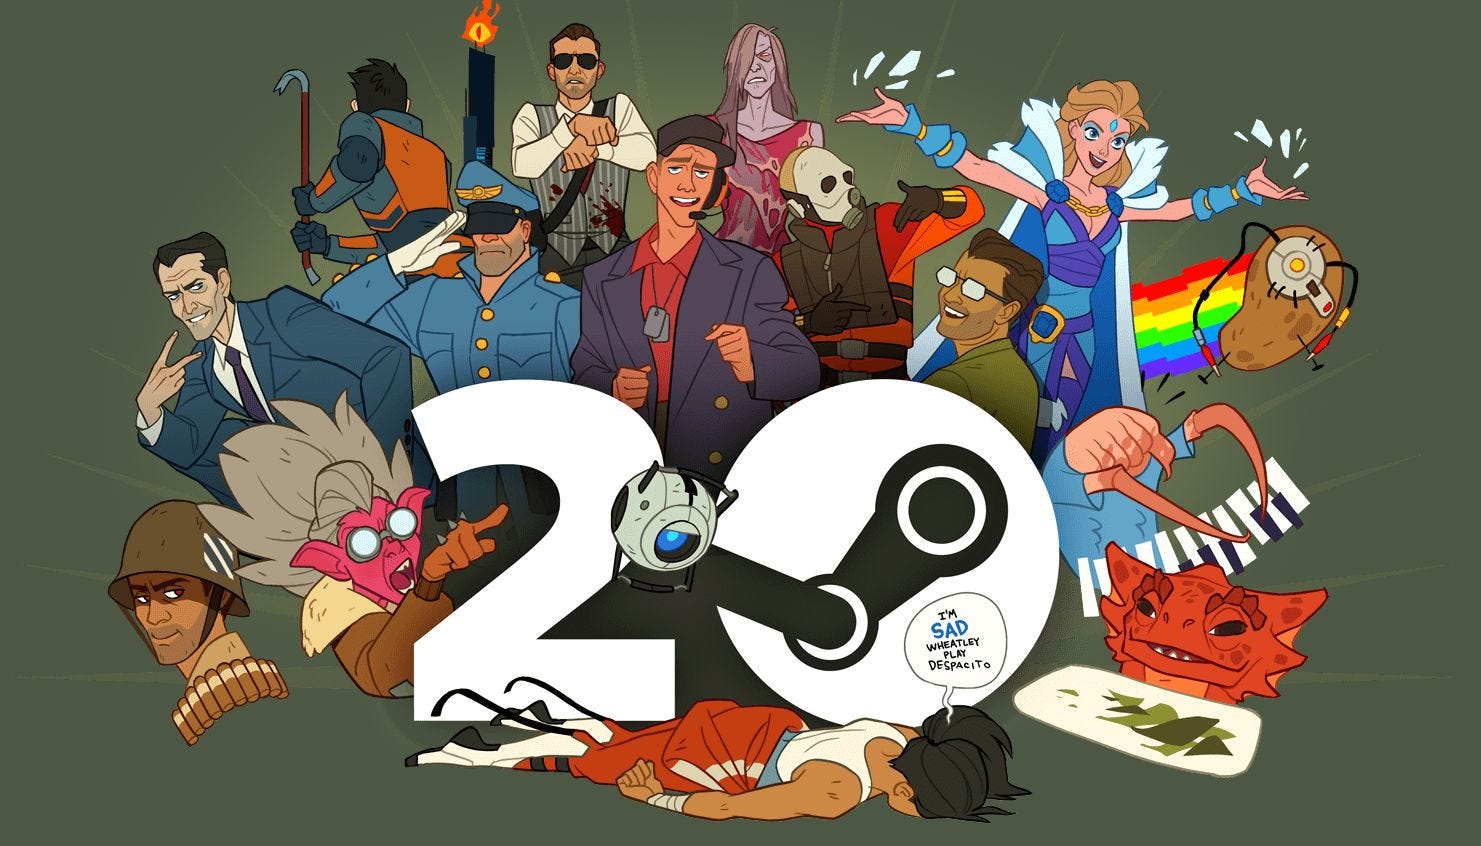 steam-celebrates-its-20th-anniversary-in-the-only-way-it-knows-how:-with-a-sale